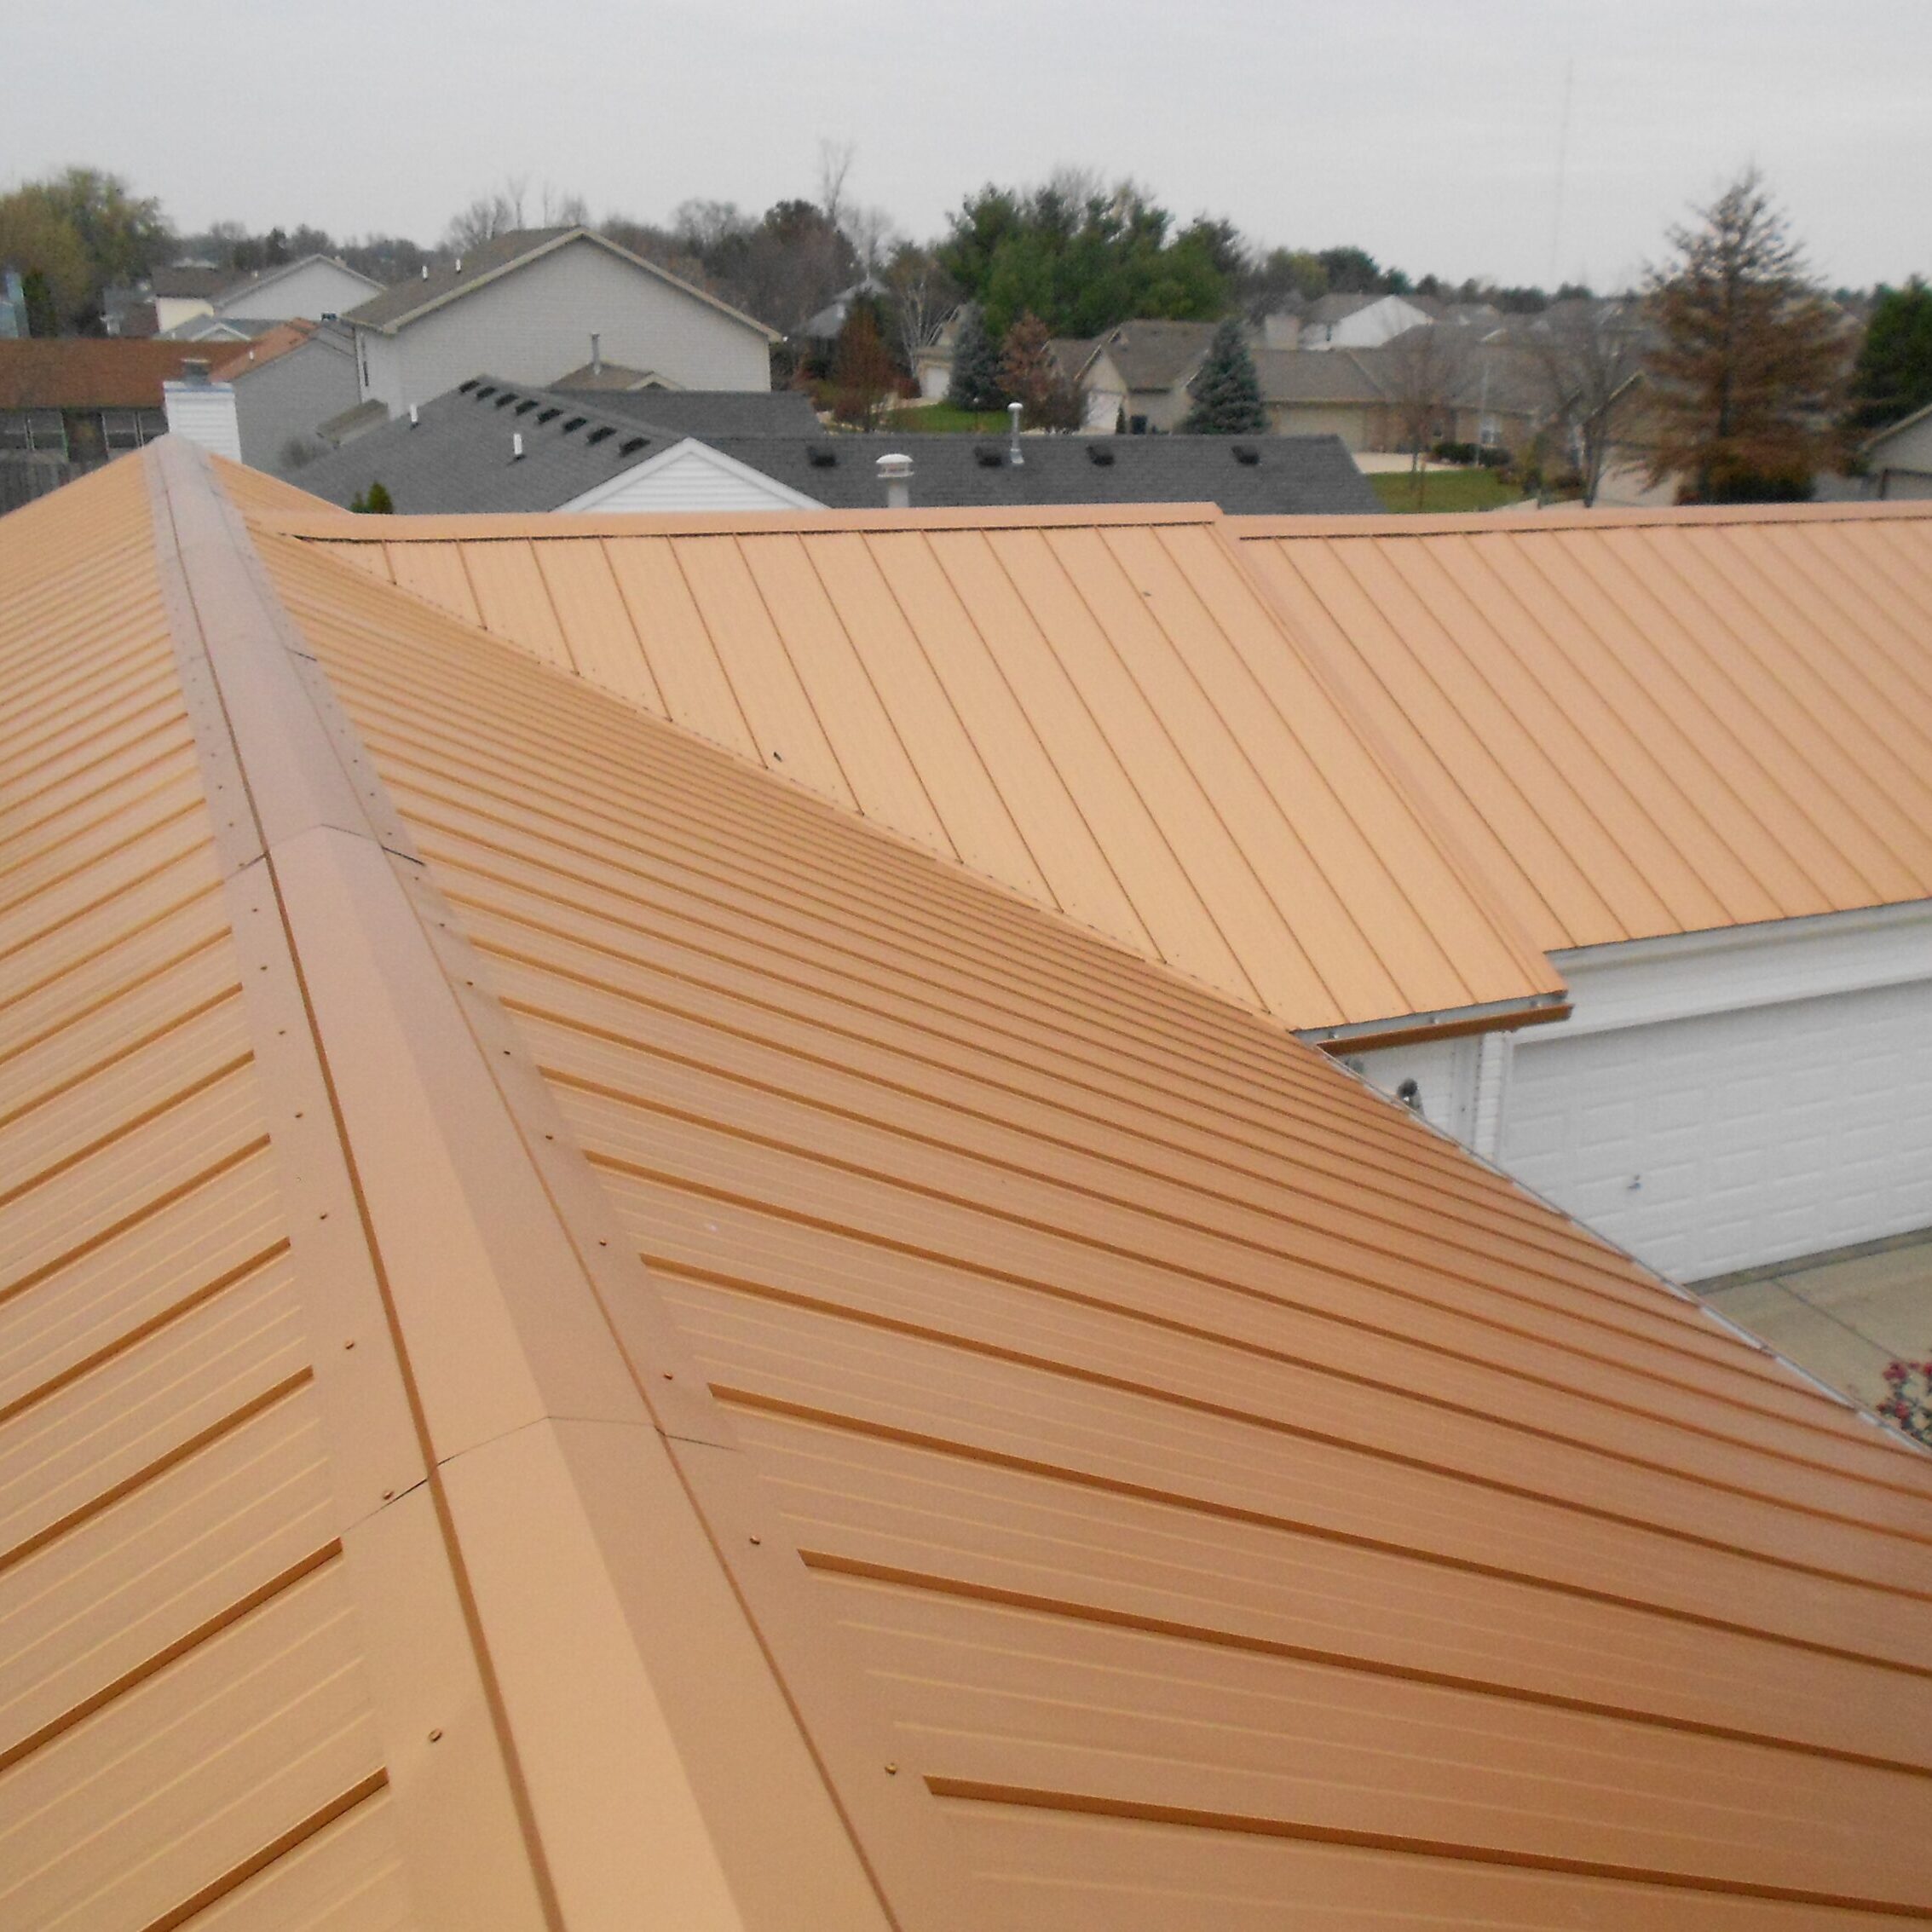 coors remodeling offers a roofing contractor